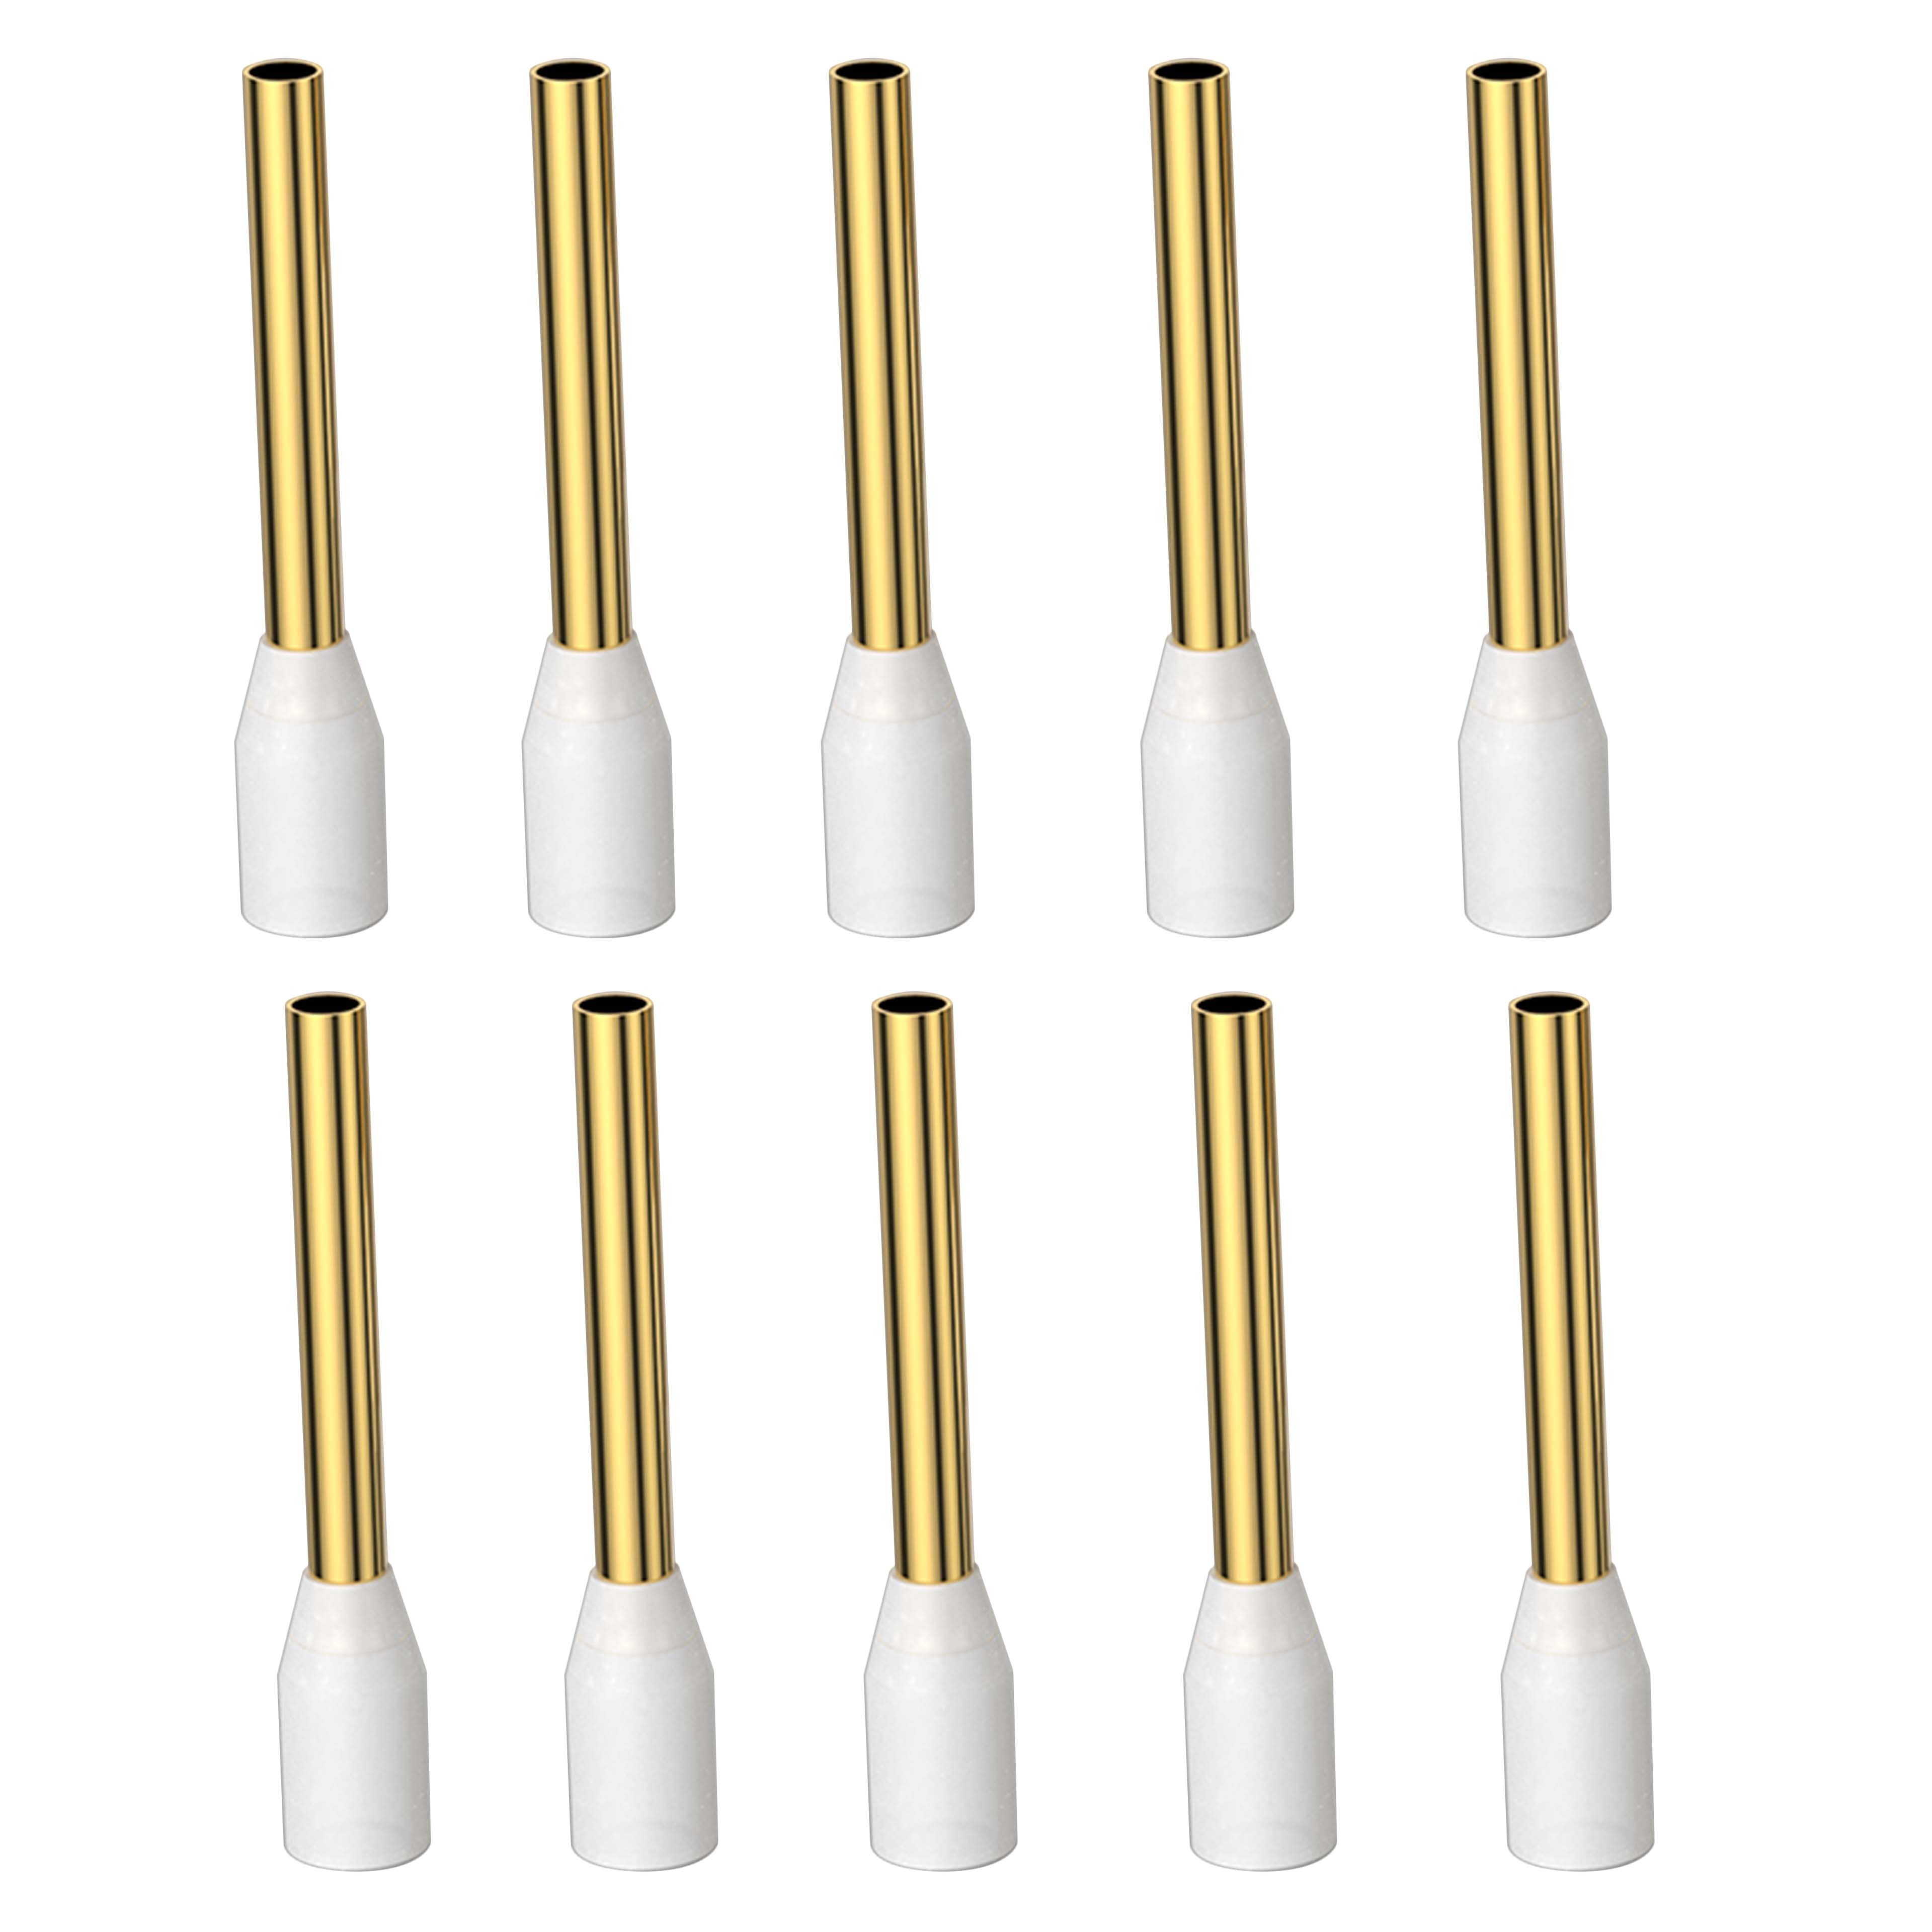 VIBORG VB2518G Cable Crimping Tips with Insulation 24k Gold-Plated Copper 2.5mm² (Set x10)